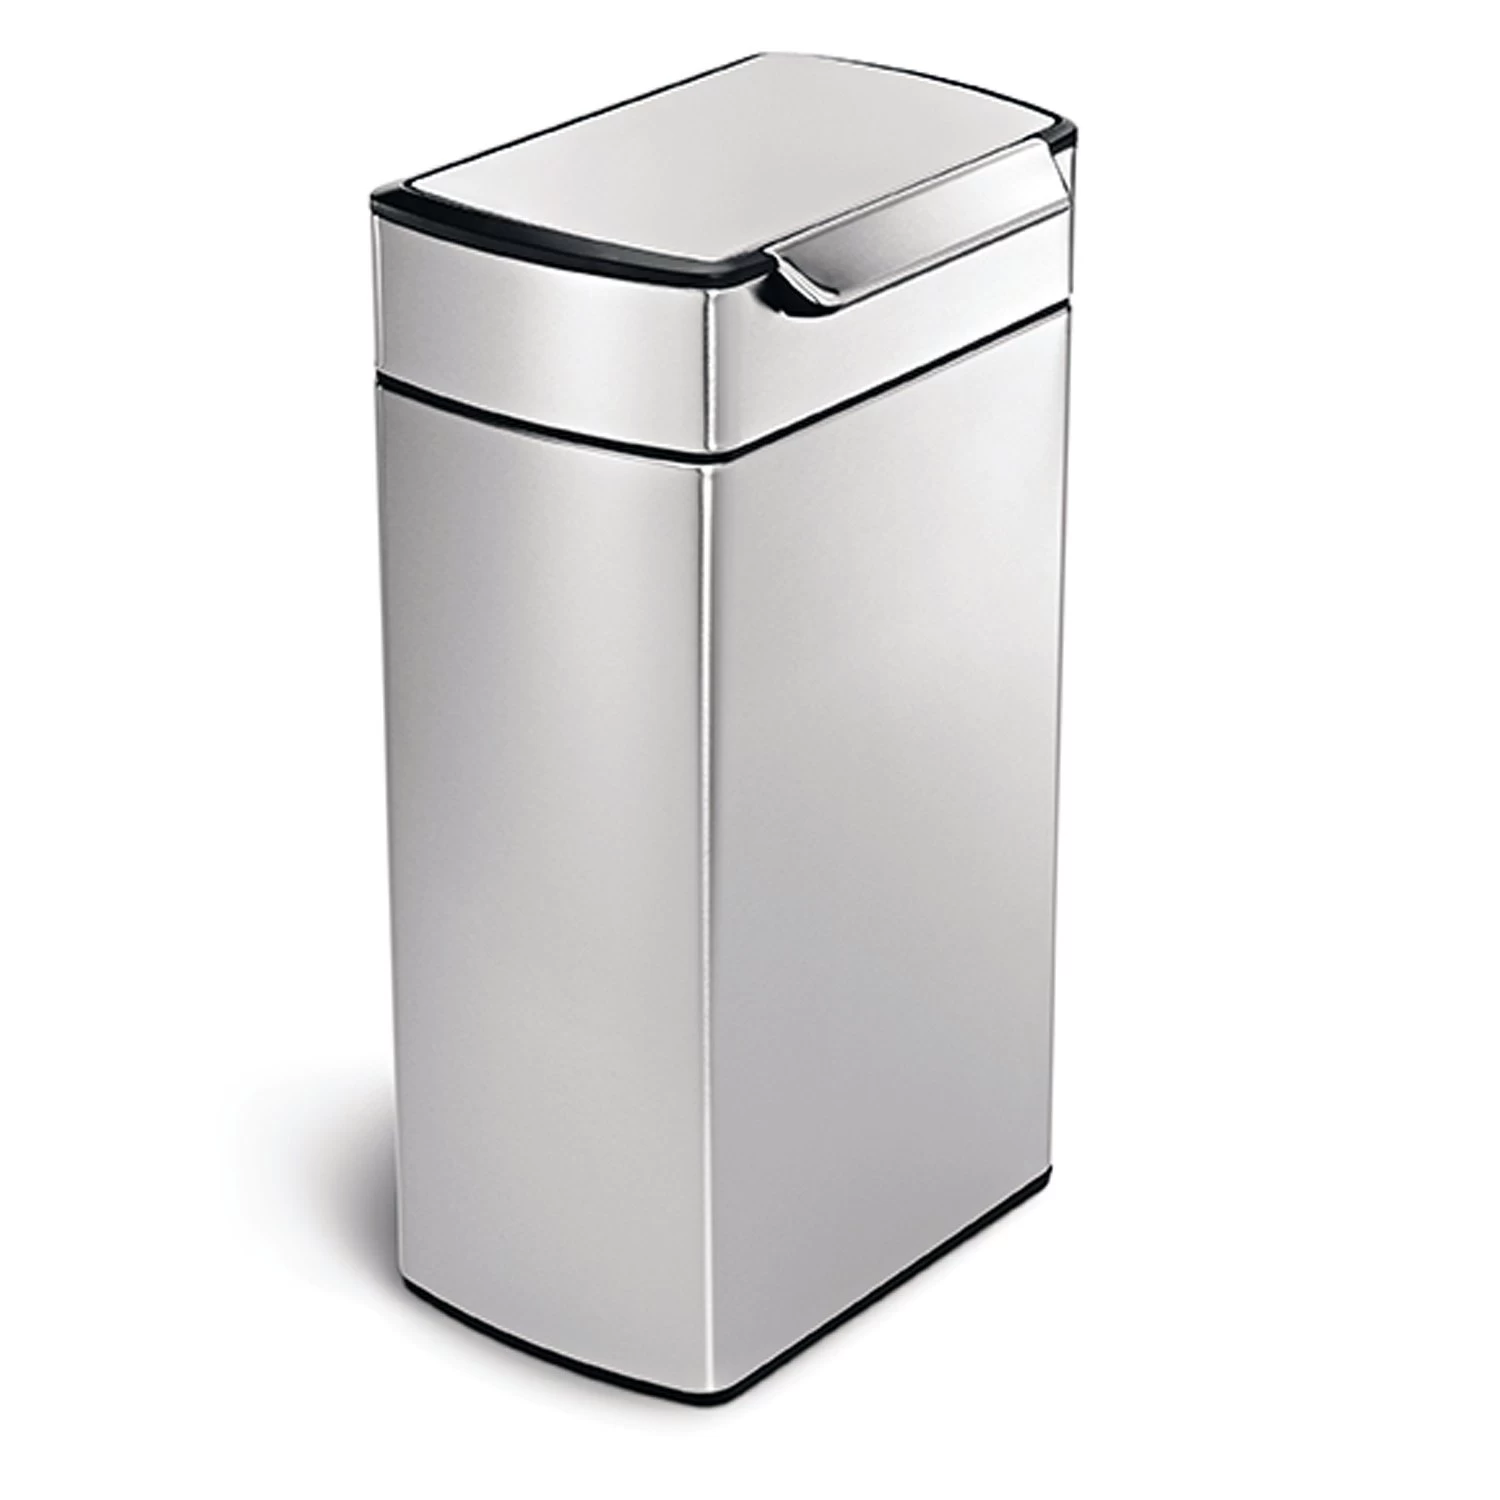 Stainless steel trash can ,Rectangular Touch-Bar Trash Can,hot sale trash can EB-P0068